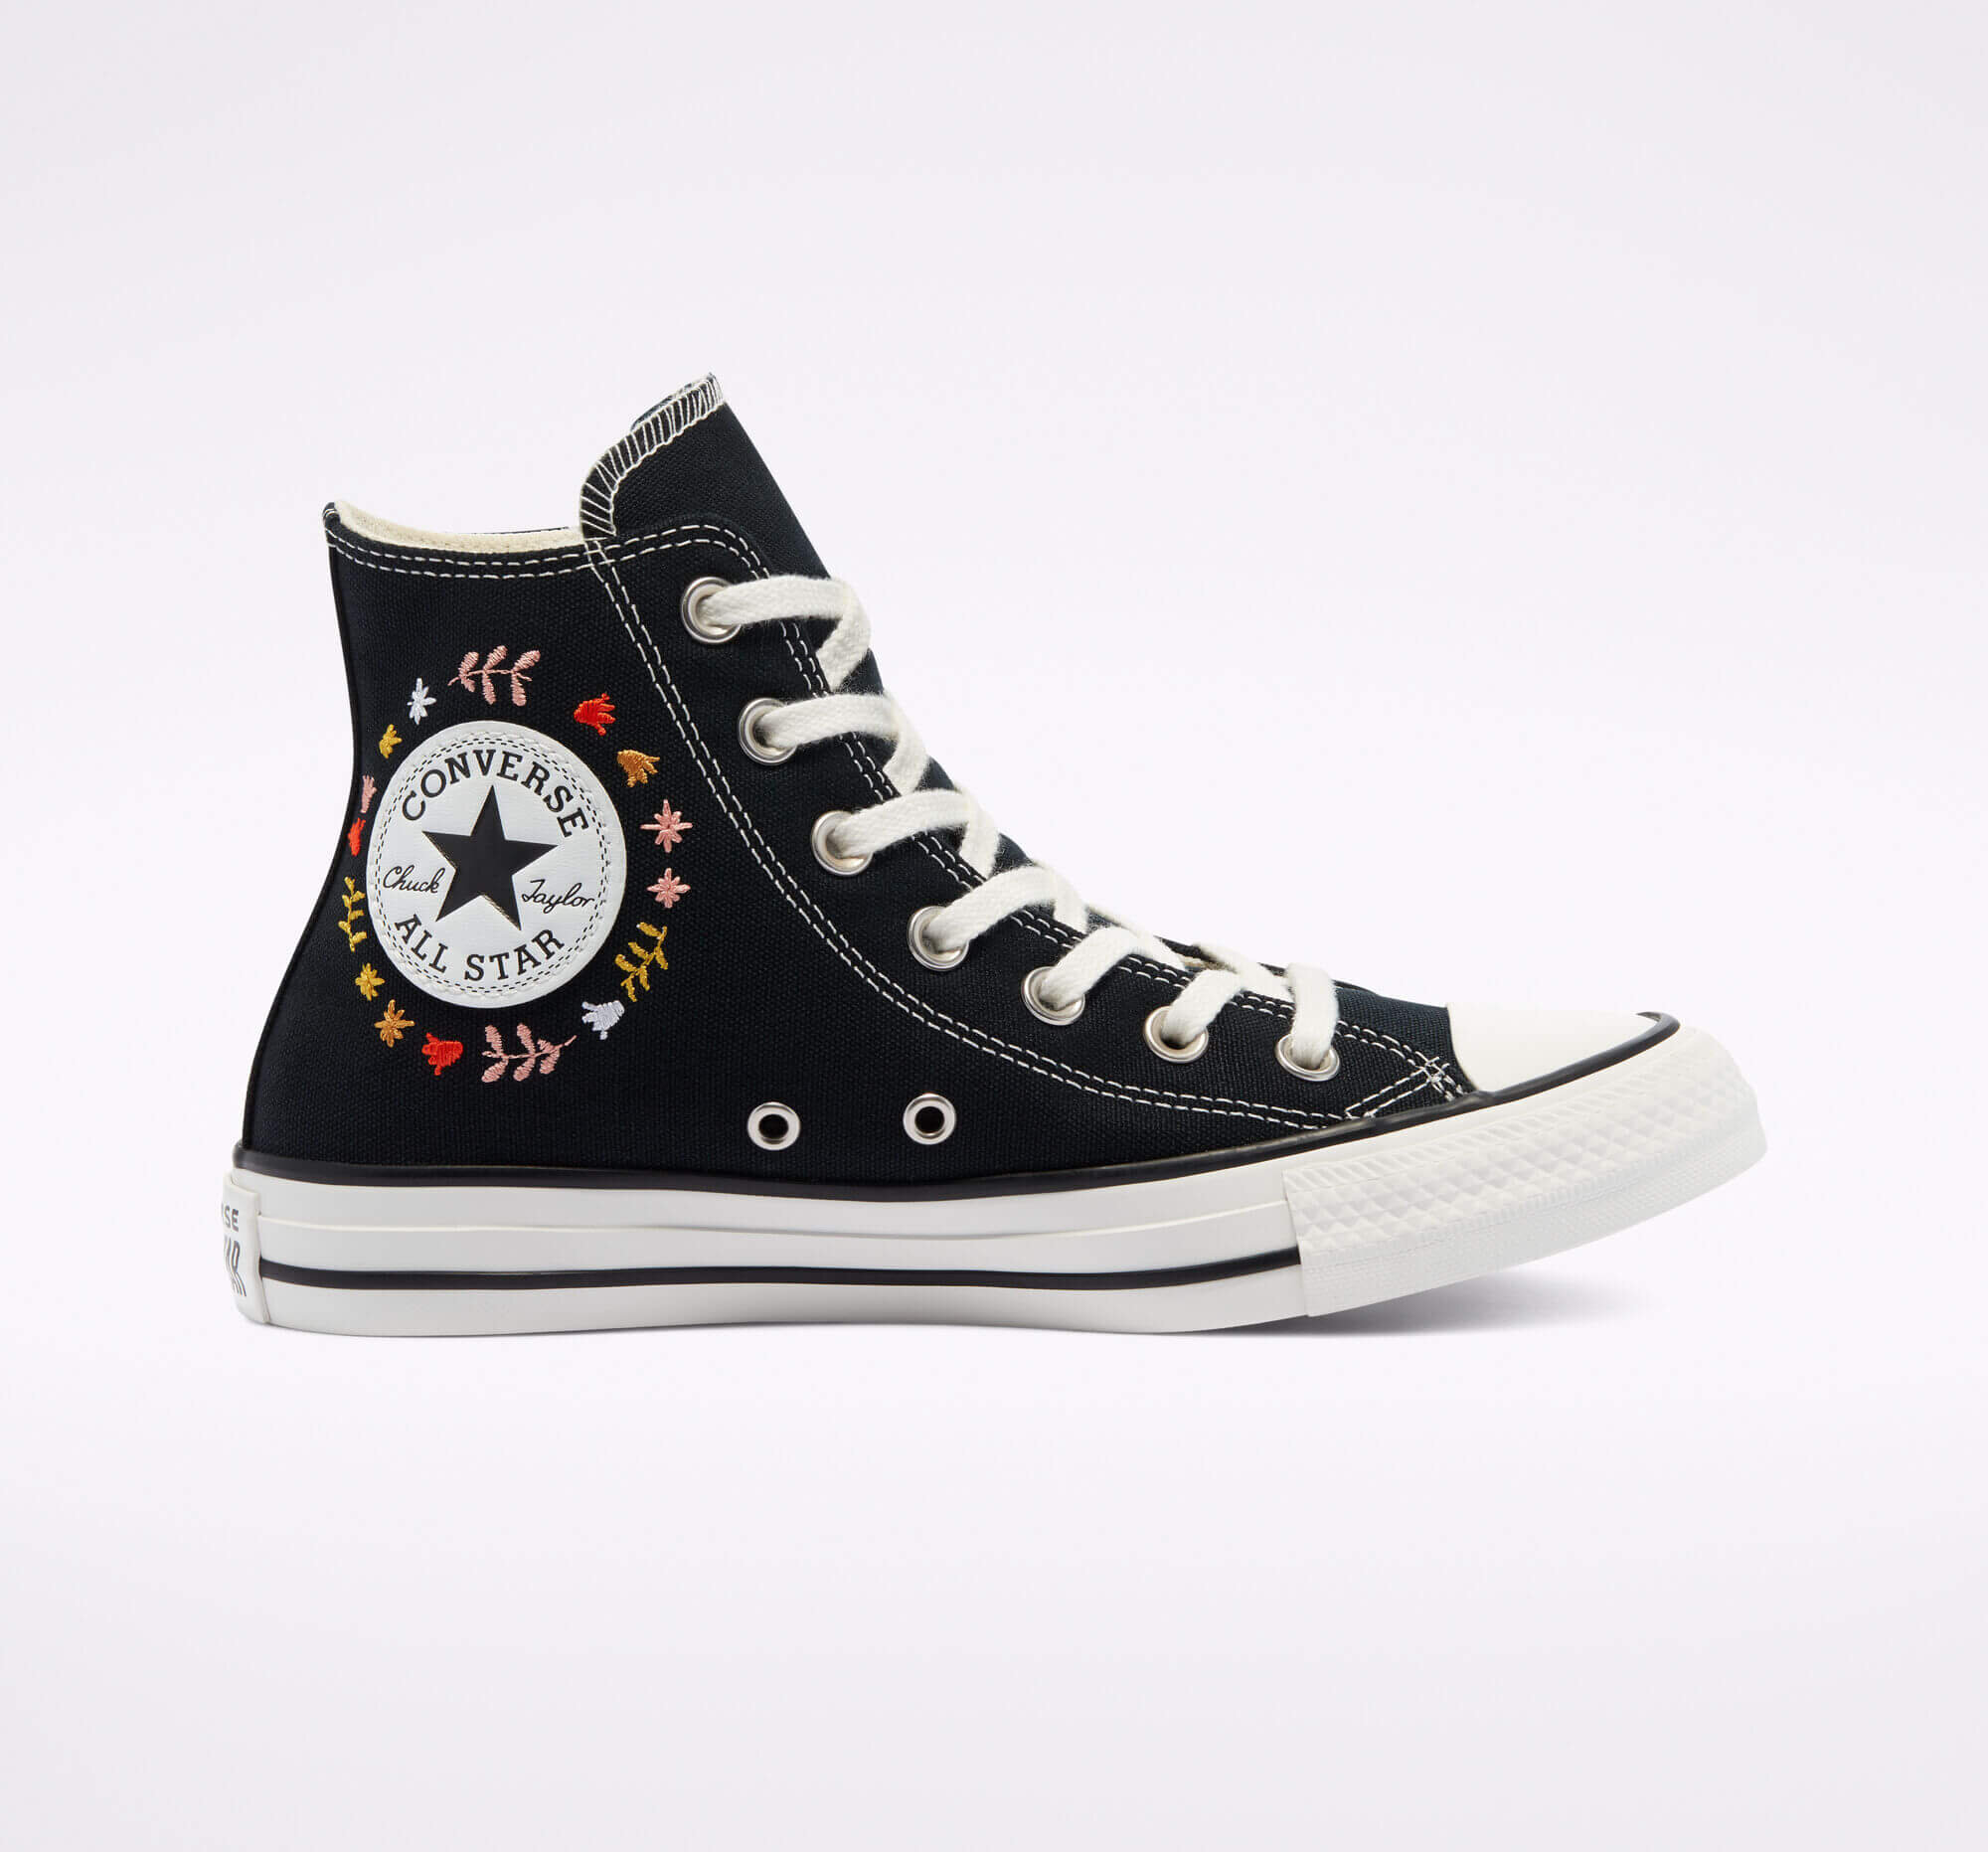 CNK-Converse-My-Story-Collection-Its-Okay-To-Wander-Black-All-Star-High-1.jpg